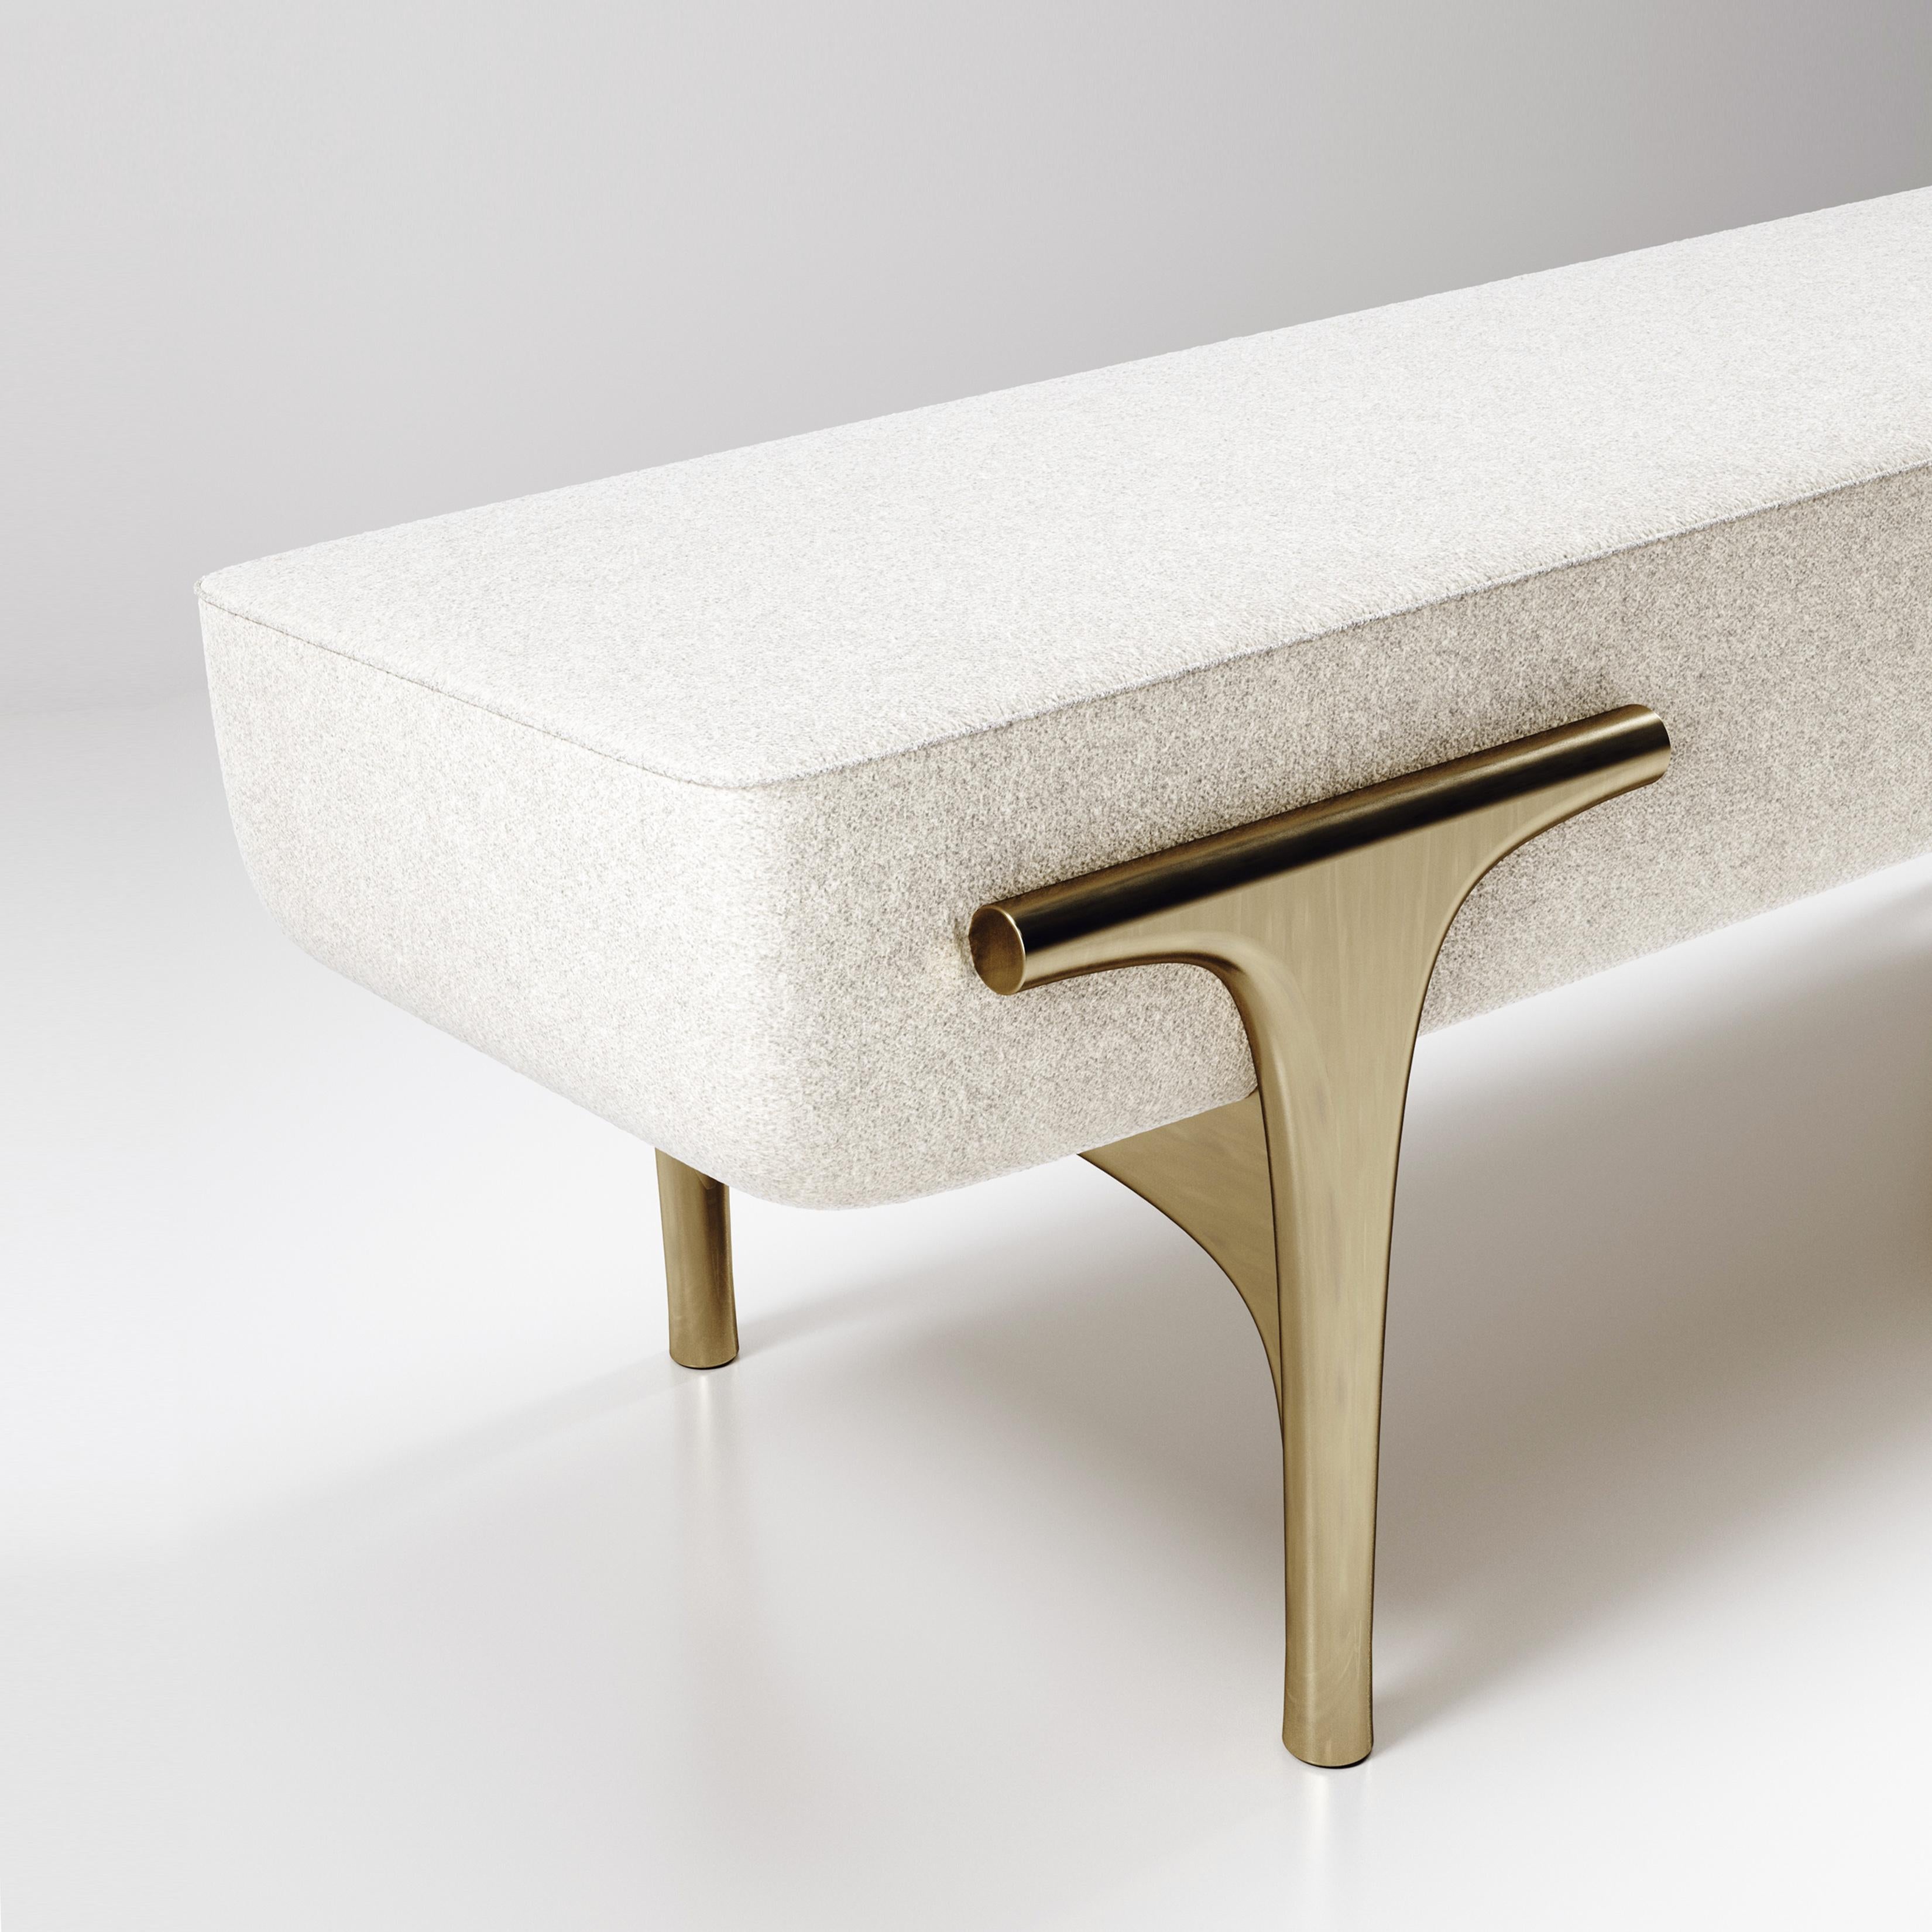 The Ramo bench by R & Y Augousti is an elegant and versatile piece. The upholstered piece provides comfort while retaining a unique aesthetic with the bronze-patina brass frame and details. The cream fabric is by Pierre Frey. This listing is priced